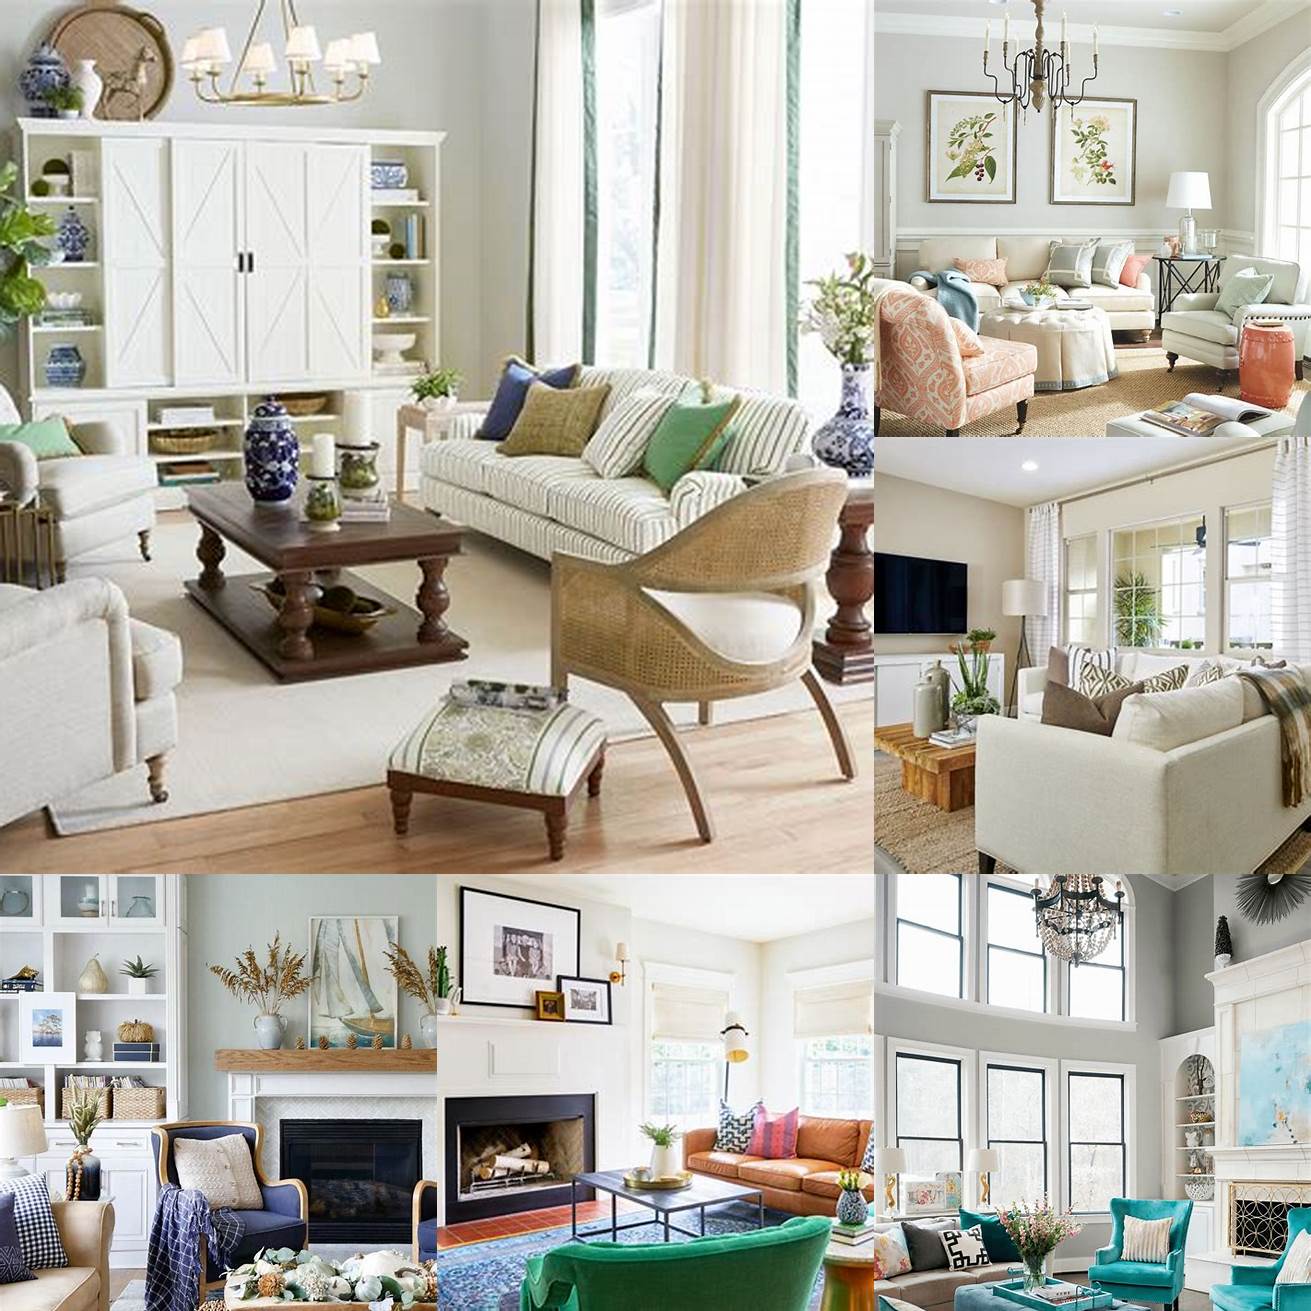 A neutral color palette with pops of greenery